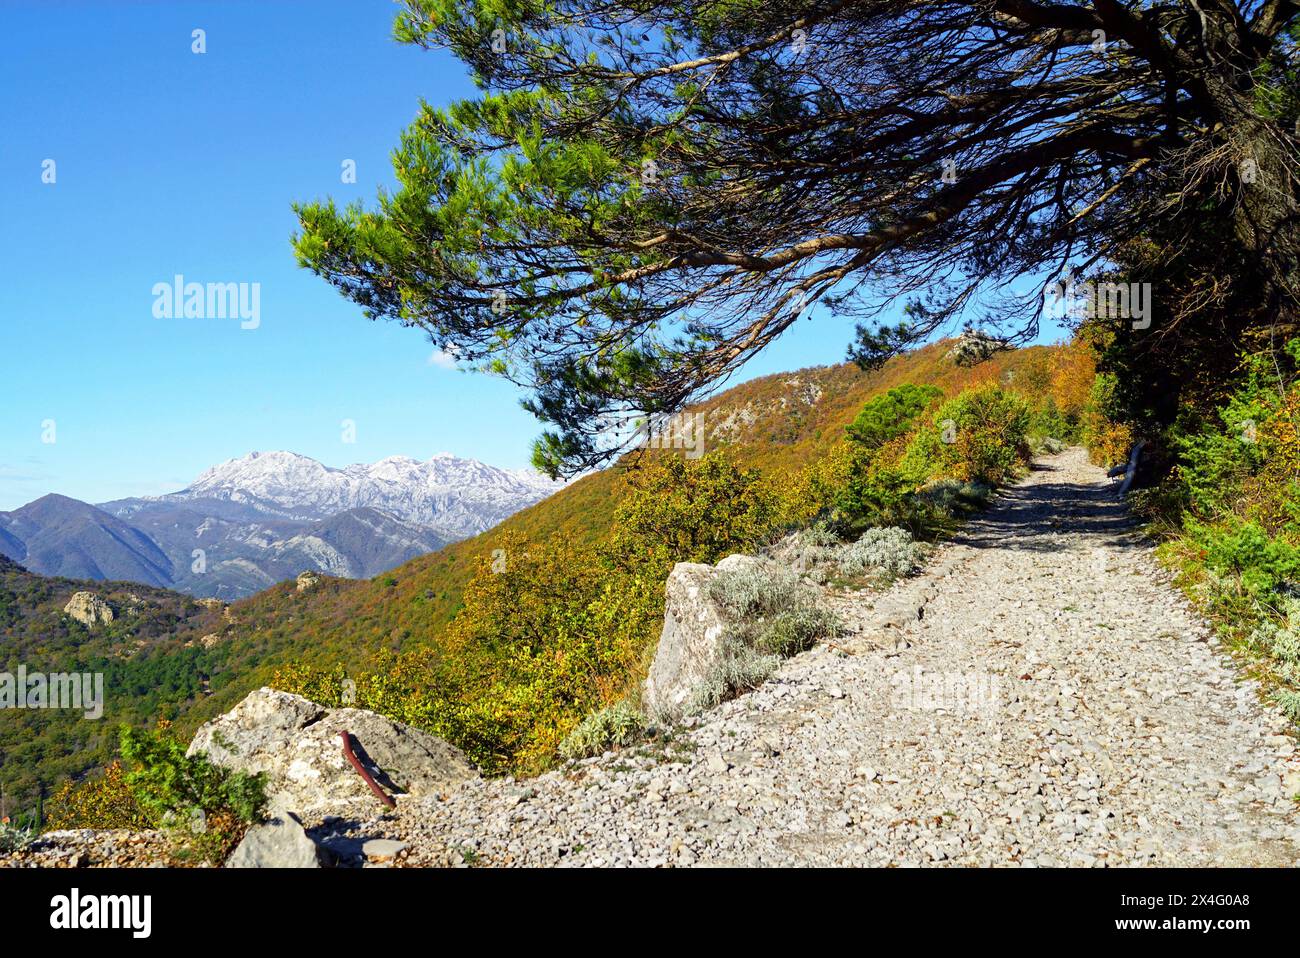 Macadam in the mountains: a bright landscape with a road, autumn trees, spreading pine and mountains with snow-capped peaks. Mount Vrmac, Montenegro Stock Photo